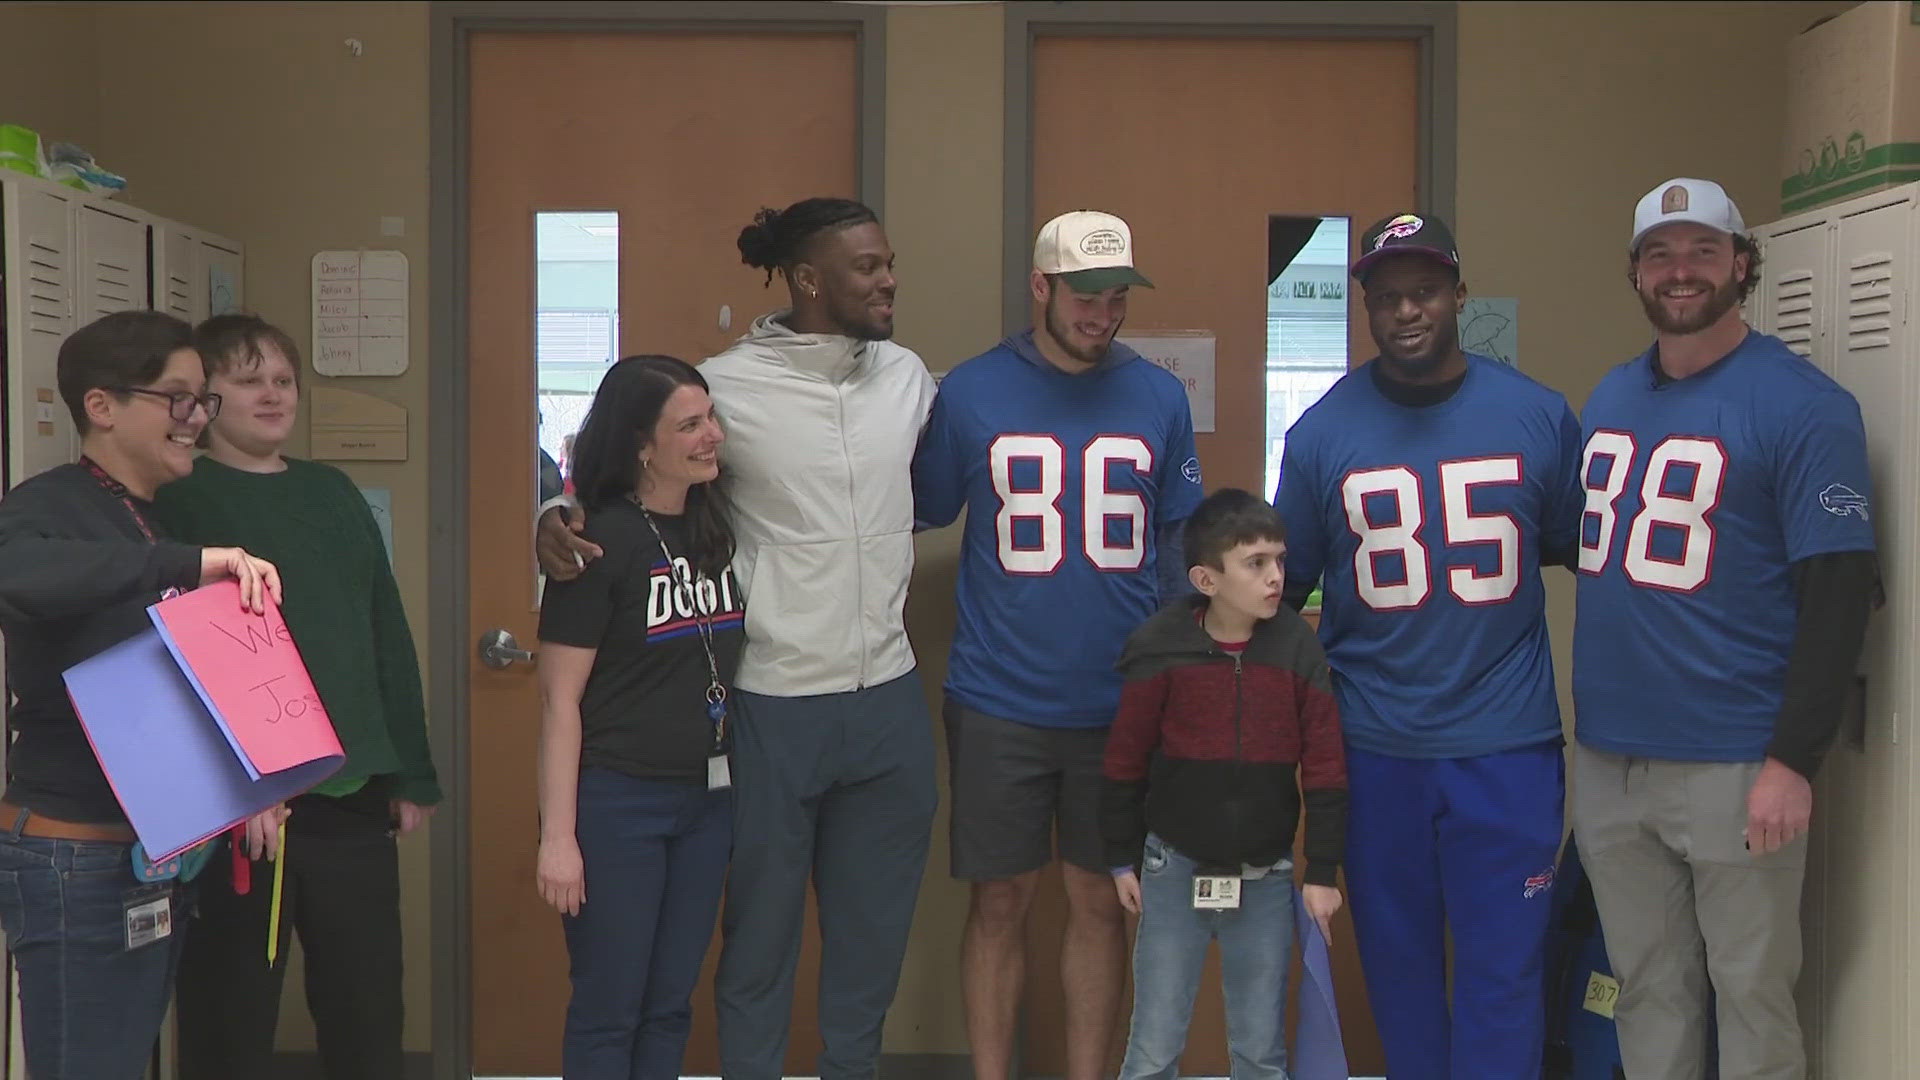 Dalton Kincaid, Dawson Knox, Tre' McKitty, and Quintin Morris visited classrooms at the academy and spent time with students and staff at their Special Ed school.